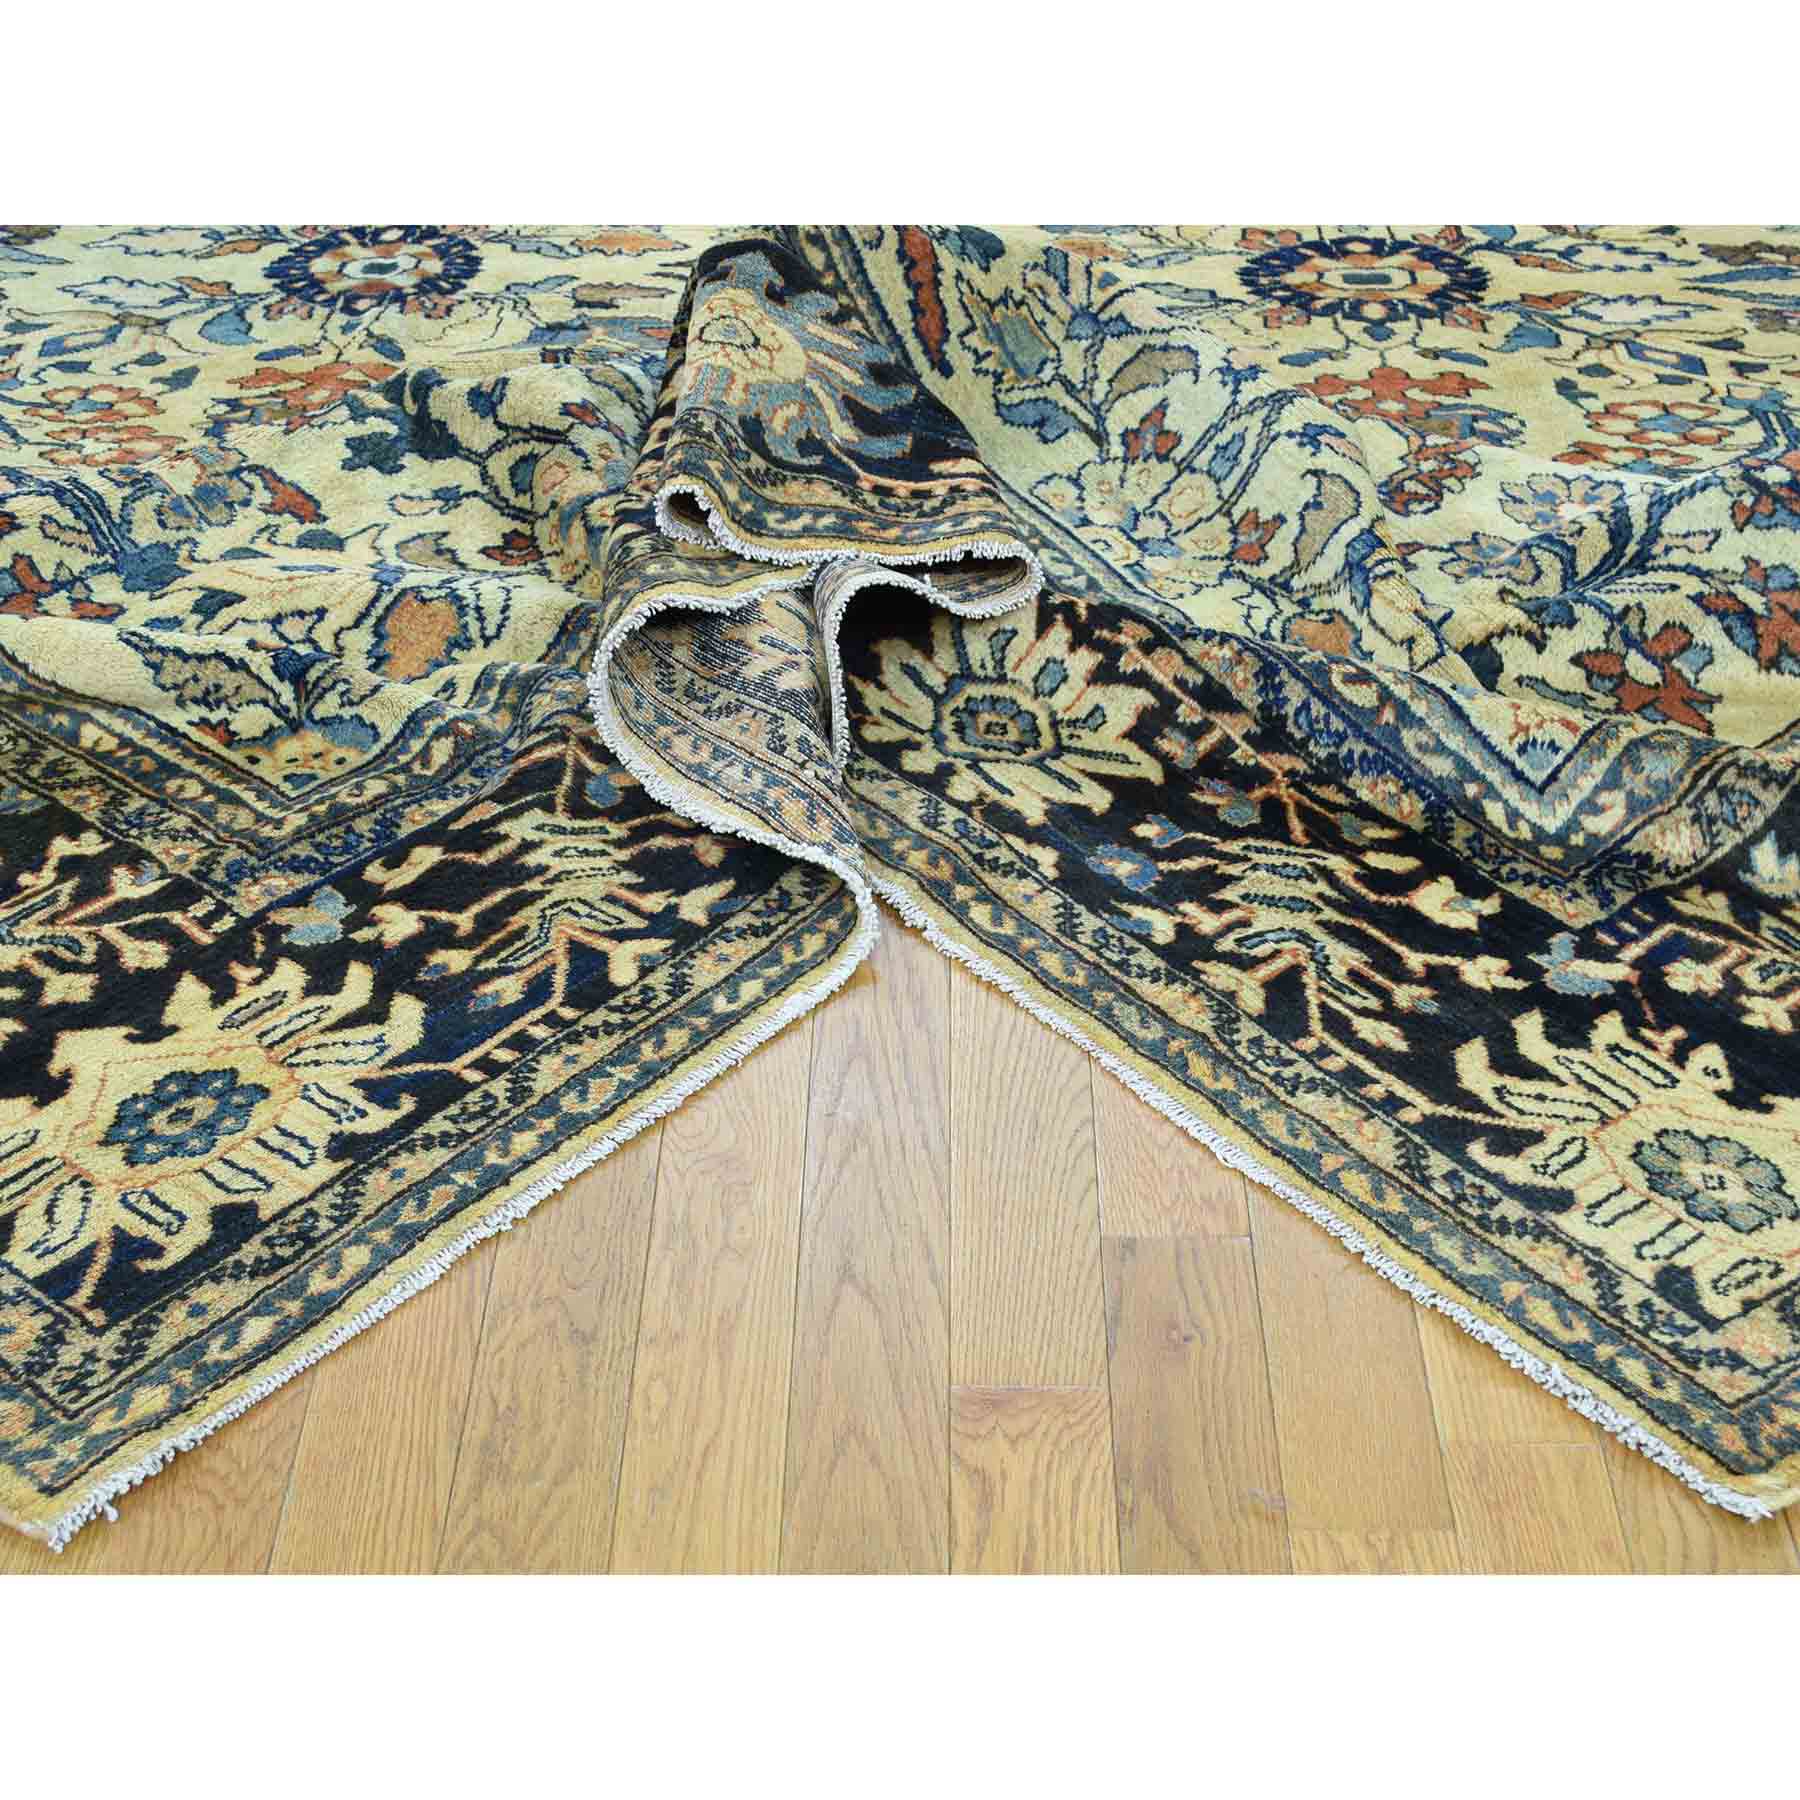 Antique-Hand-Knotted-Rug-172160